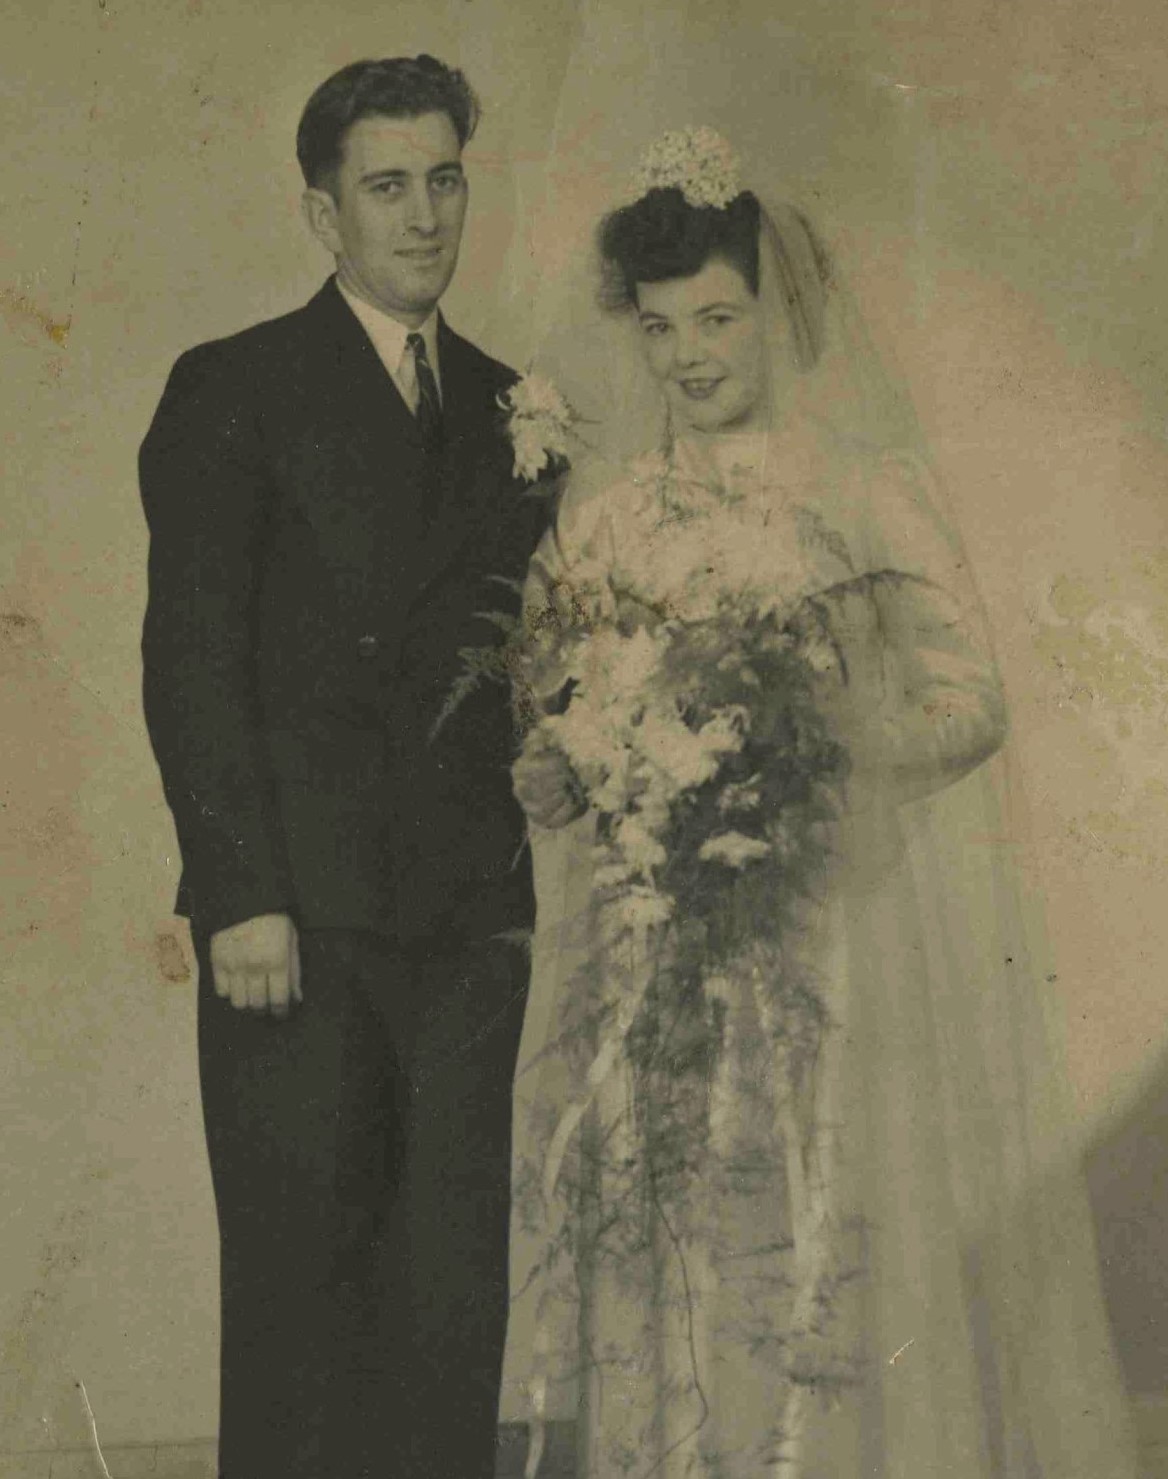 The wedding of Bernice Leverton and Don Flitney